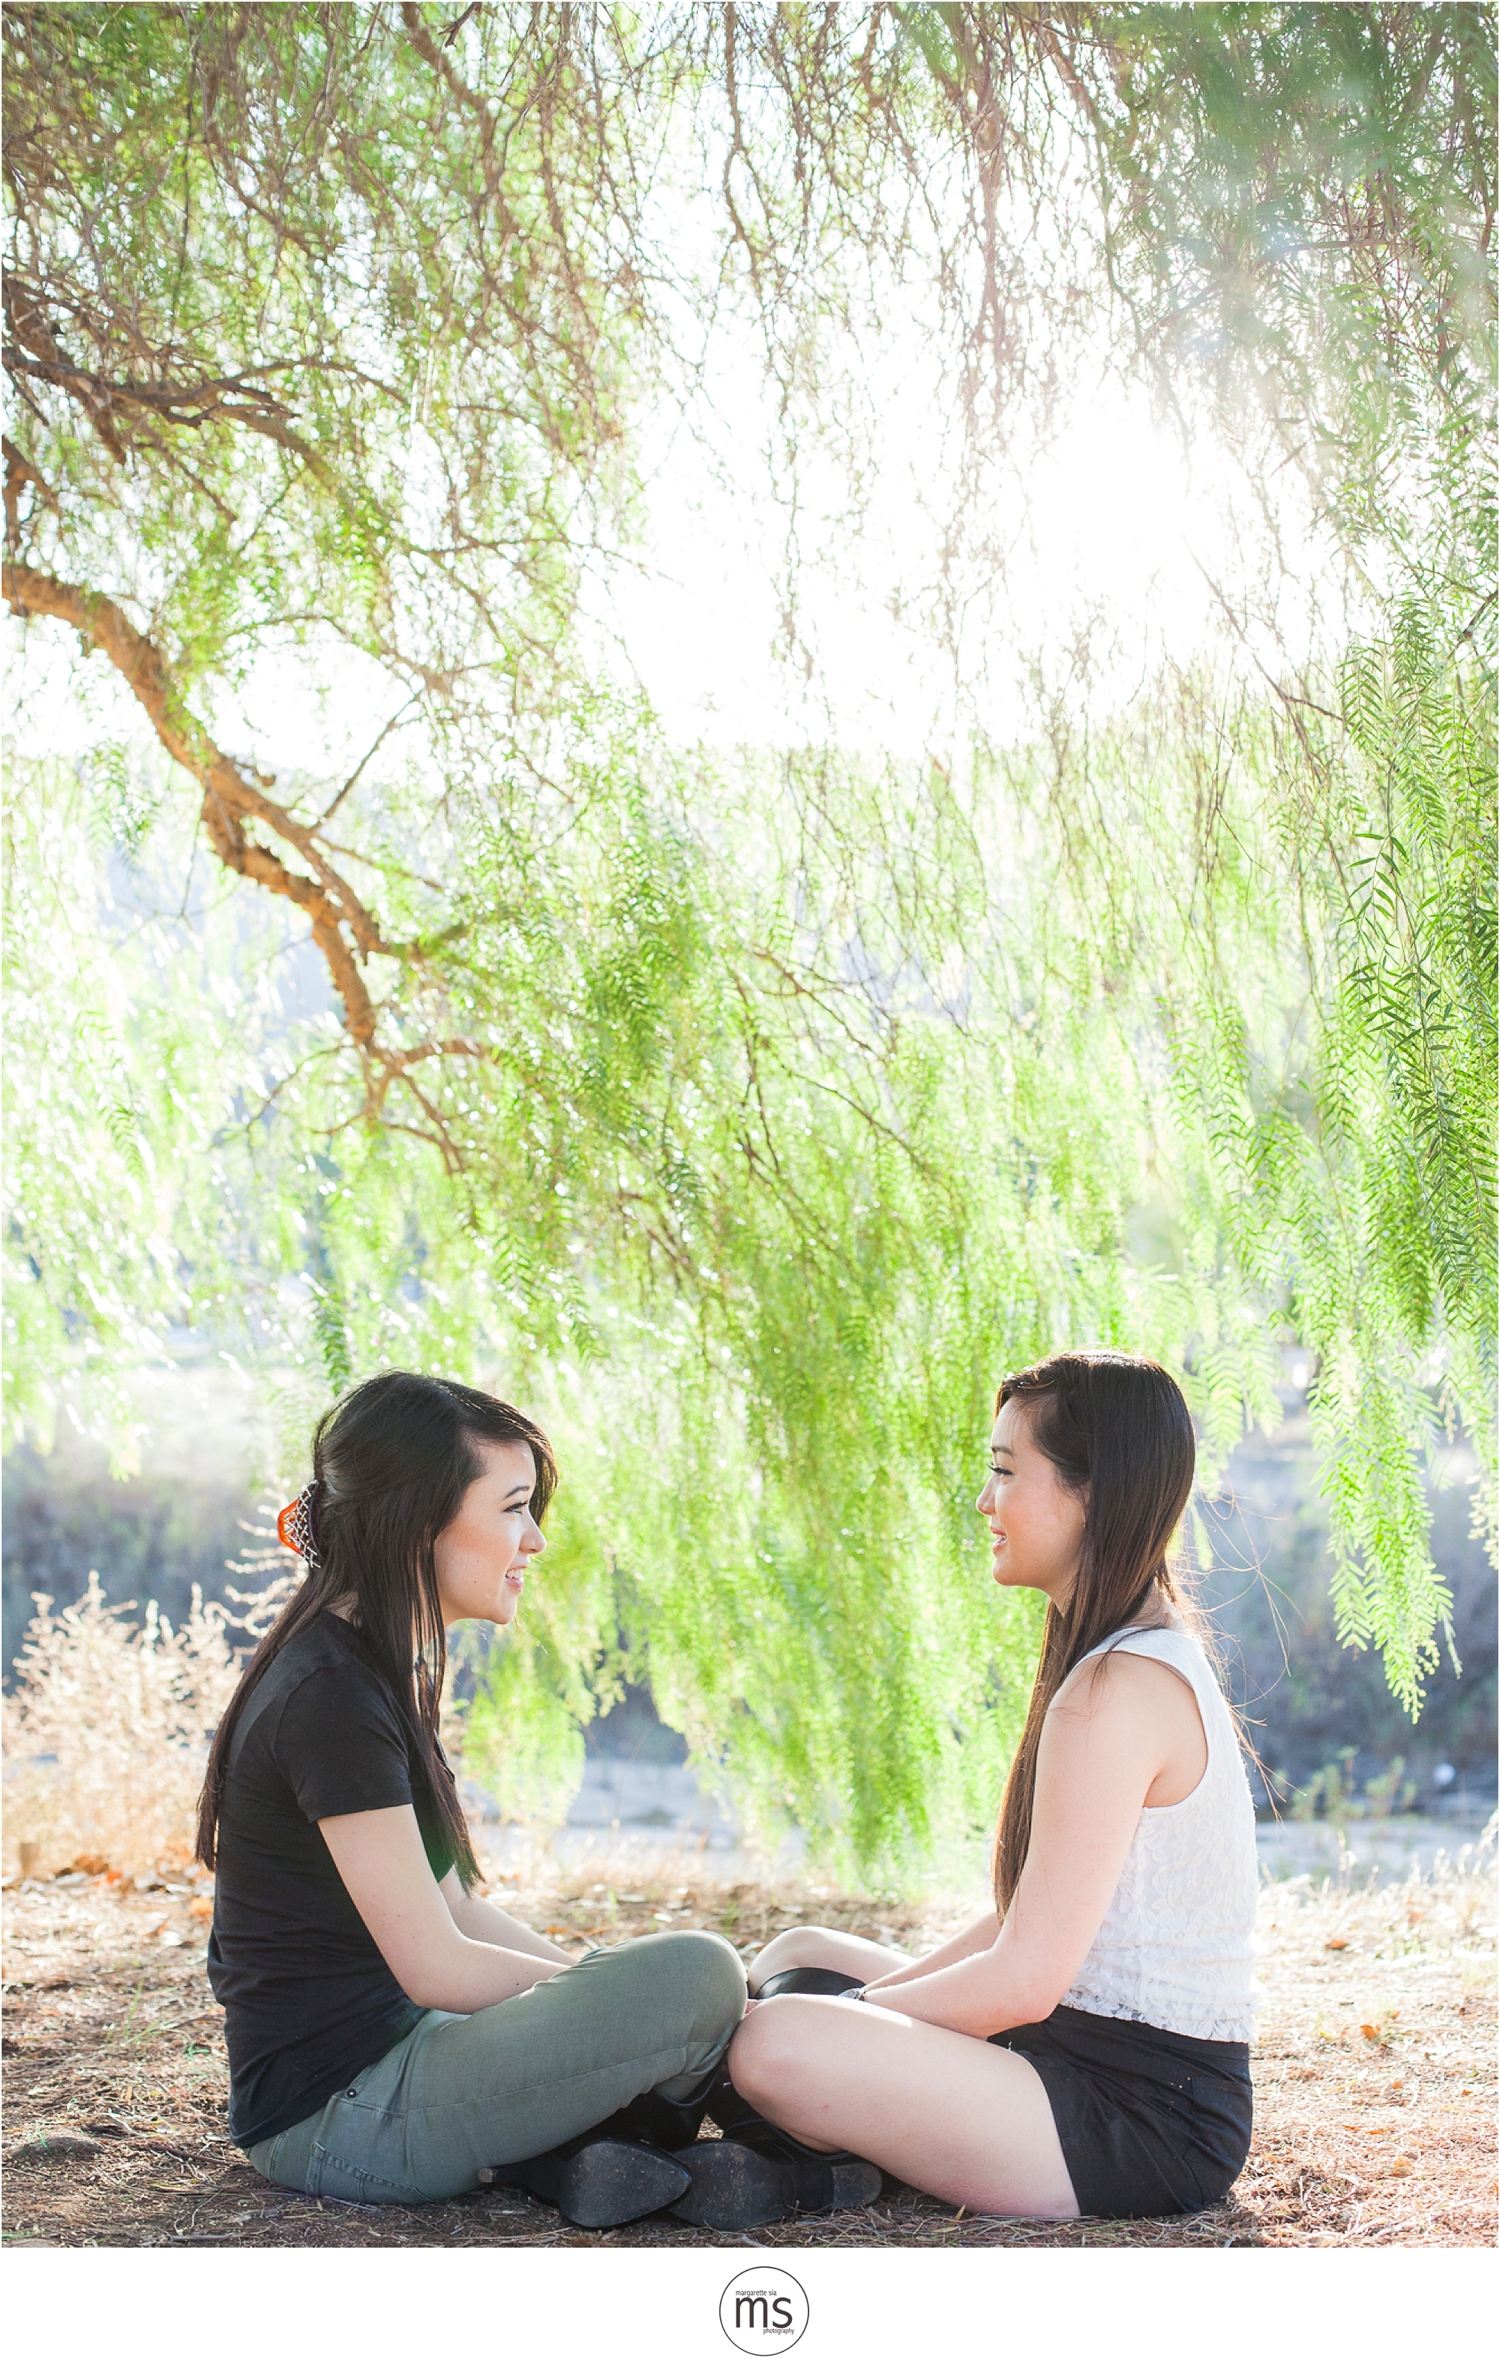 Tiffany & Natalie Old Town Temecula Margarette Sia Photography_0063